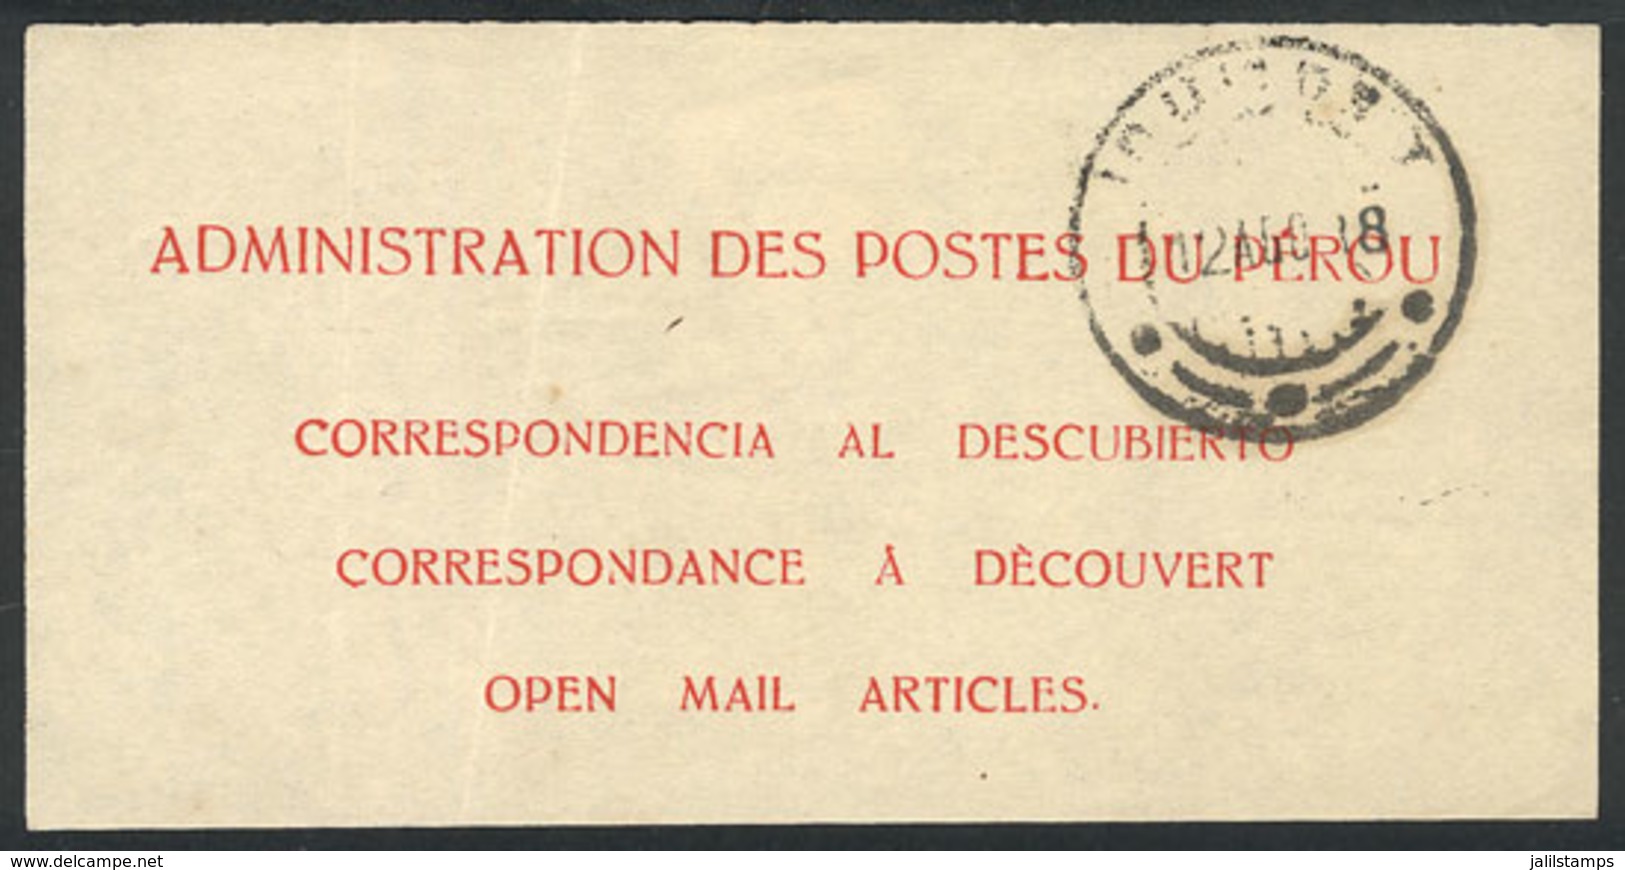 PERU: Postal Label For "OPEN MAIL ARTICLES", Used In Iquique On 12/AU/1938?, VF Quality, Rare!" - Pérou